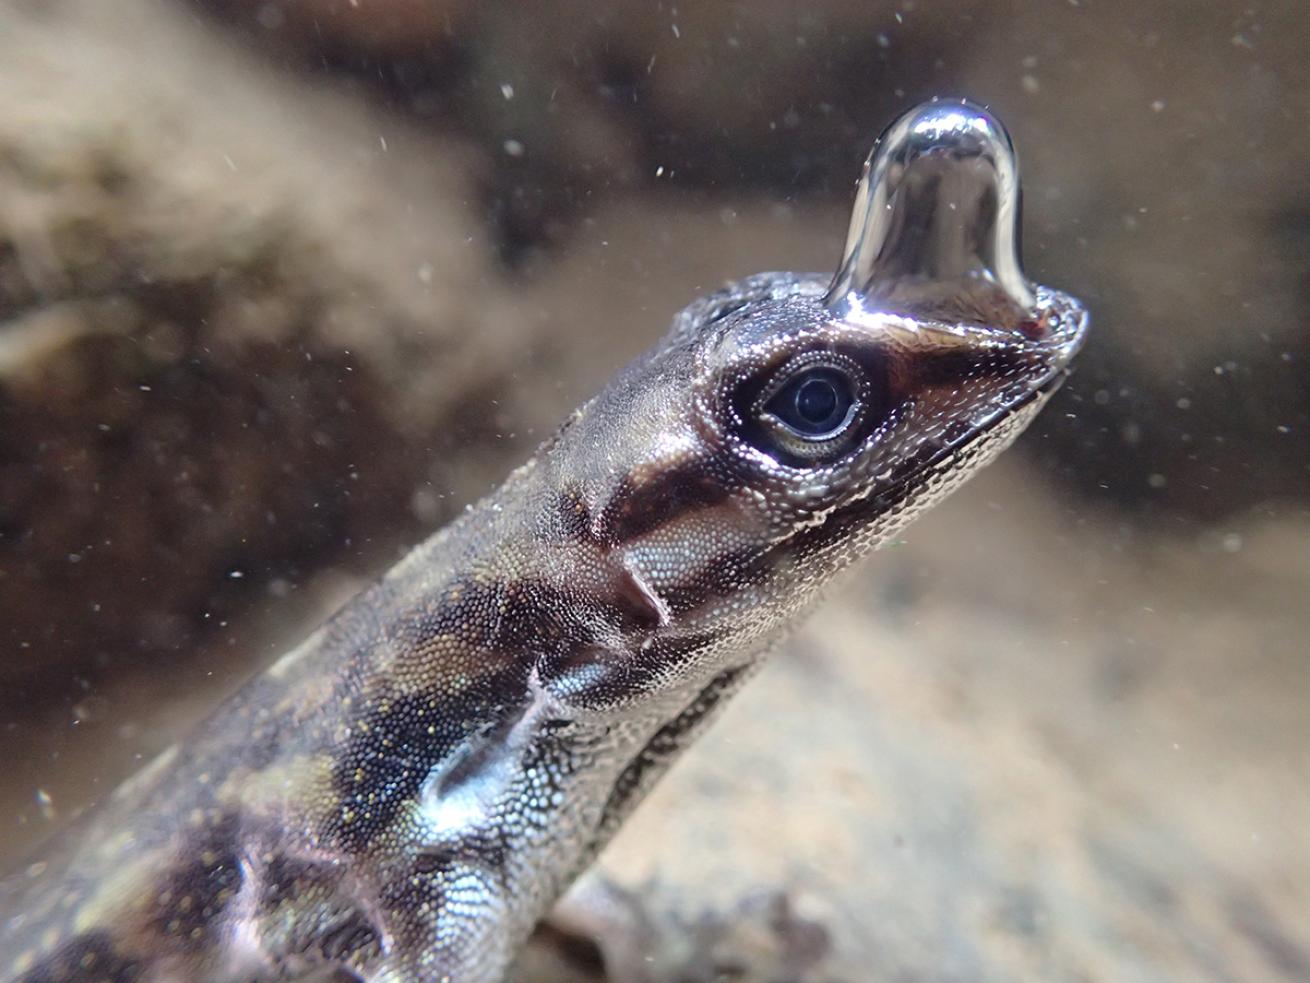 A tall bubble clings to the snout of a lizard under the water.